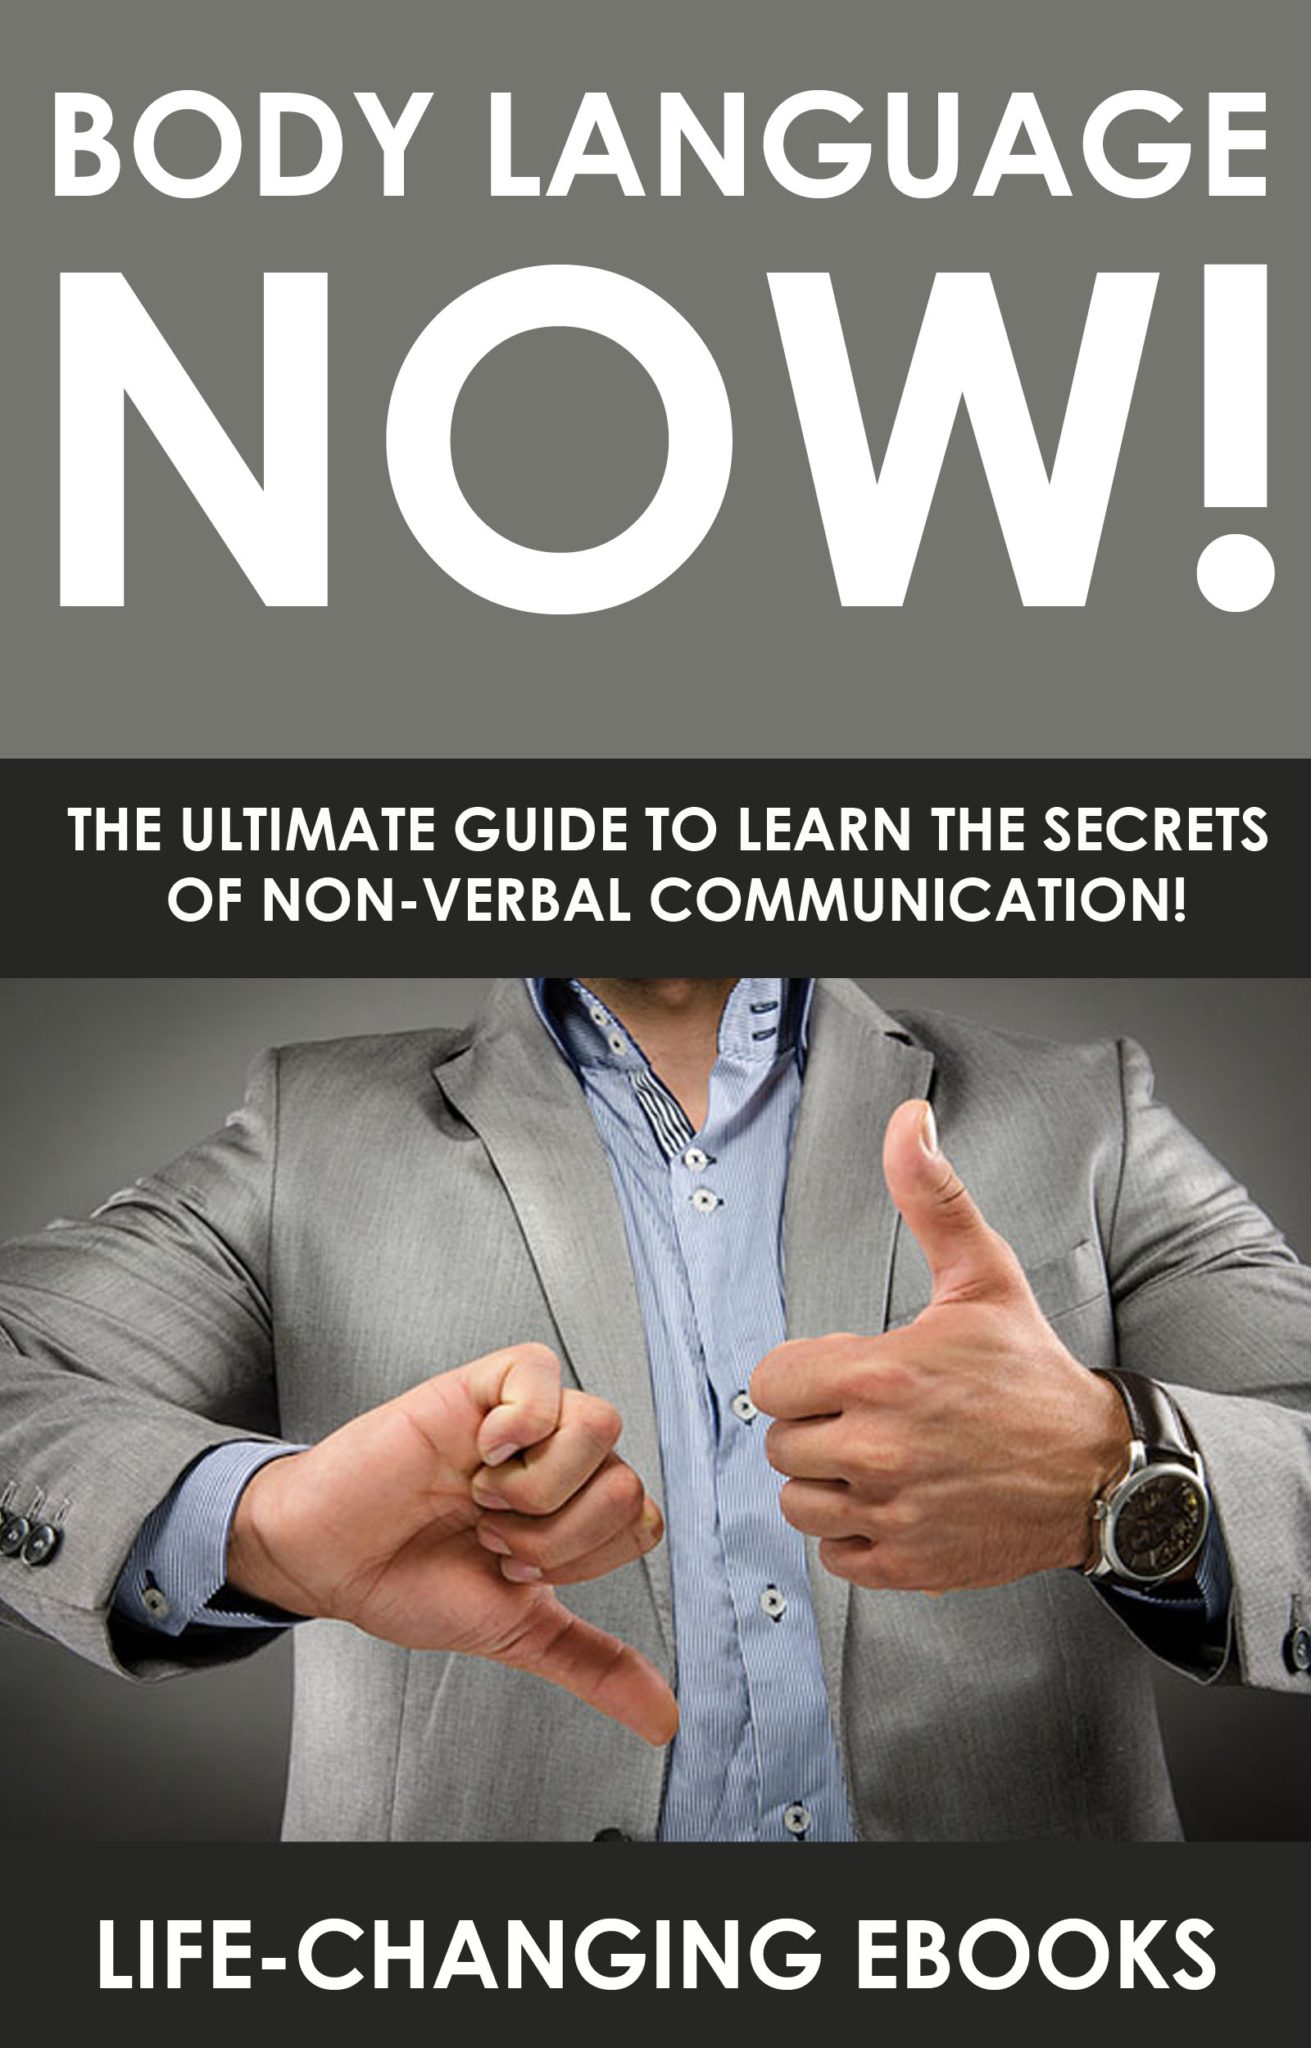 Body Language NOW! – The Ultimate Guide to Learn the Secrets of Non-Verbal Communication by “Life-Changing eBooks”